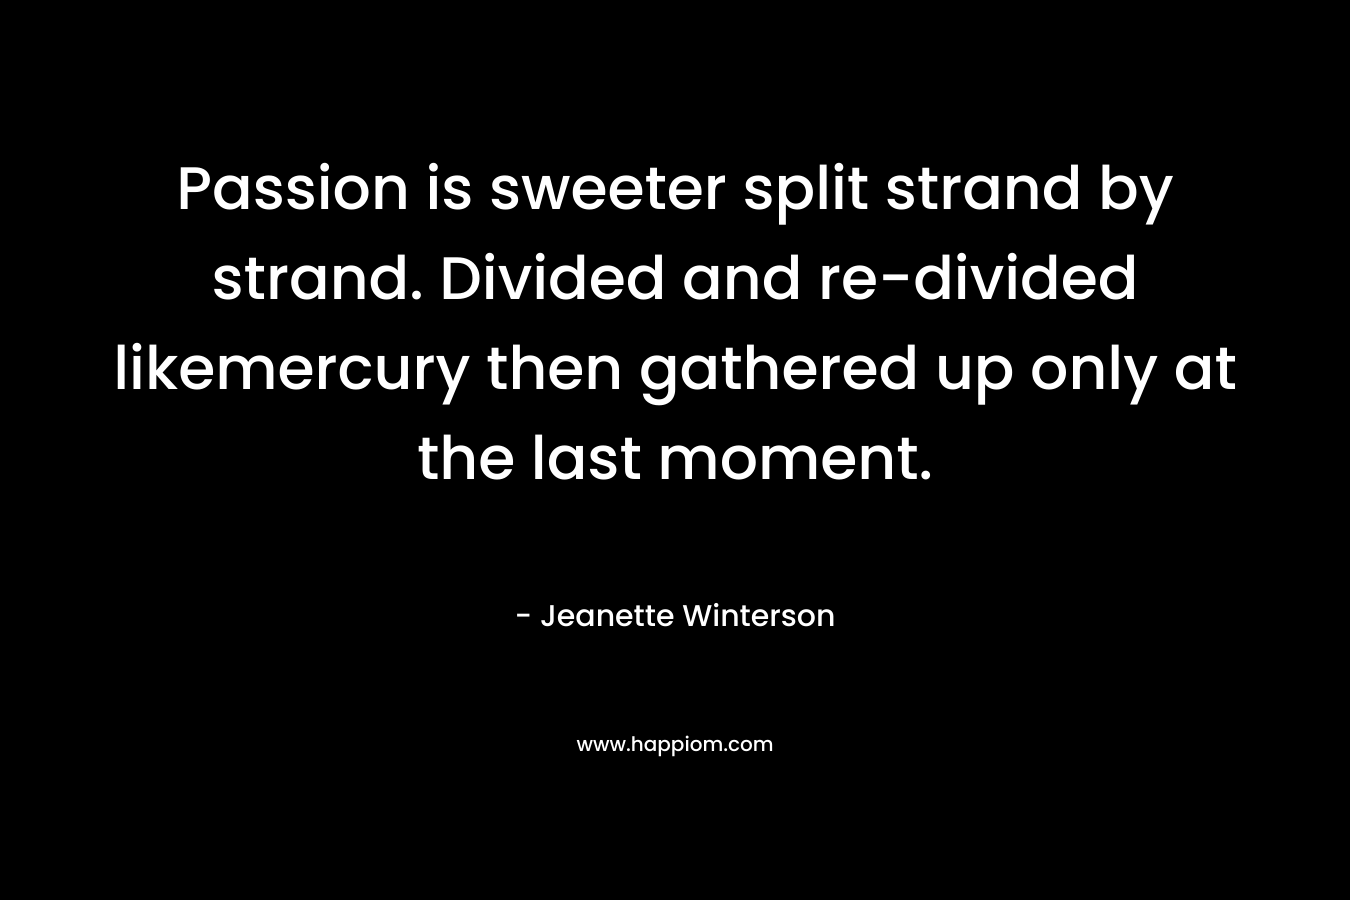 Passion is sweeter split strand by strand. Divided and re-divided likemercury then gathered up only at the last moment. – Jeanette Winterson